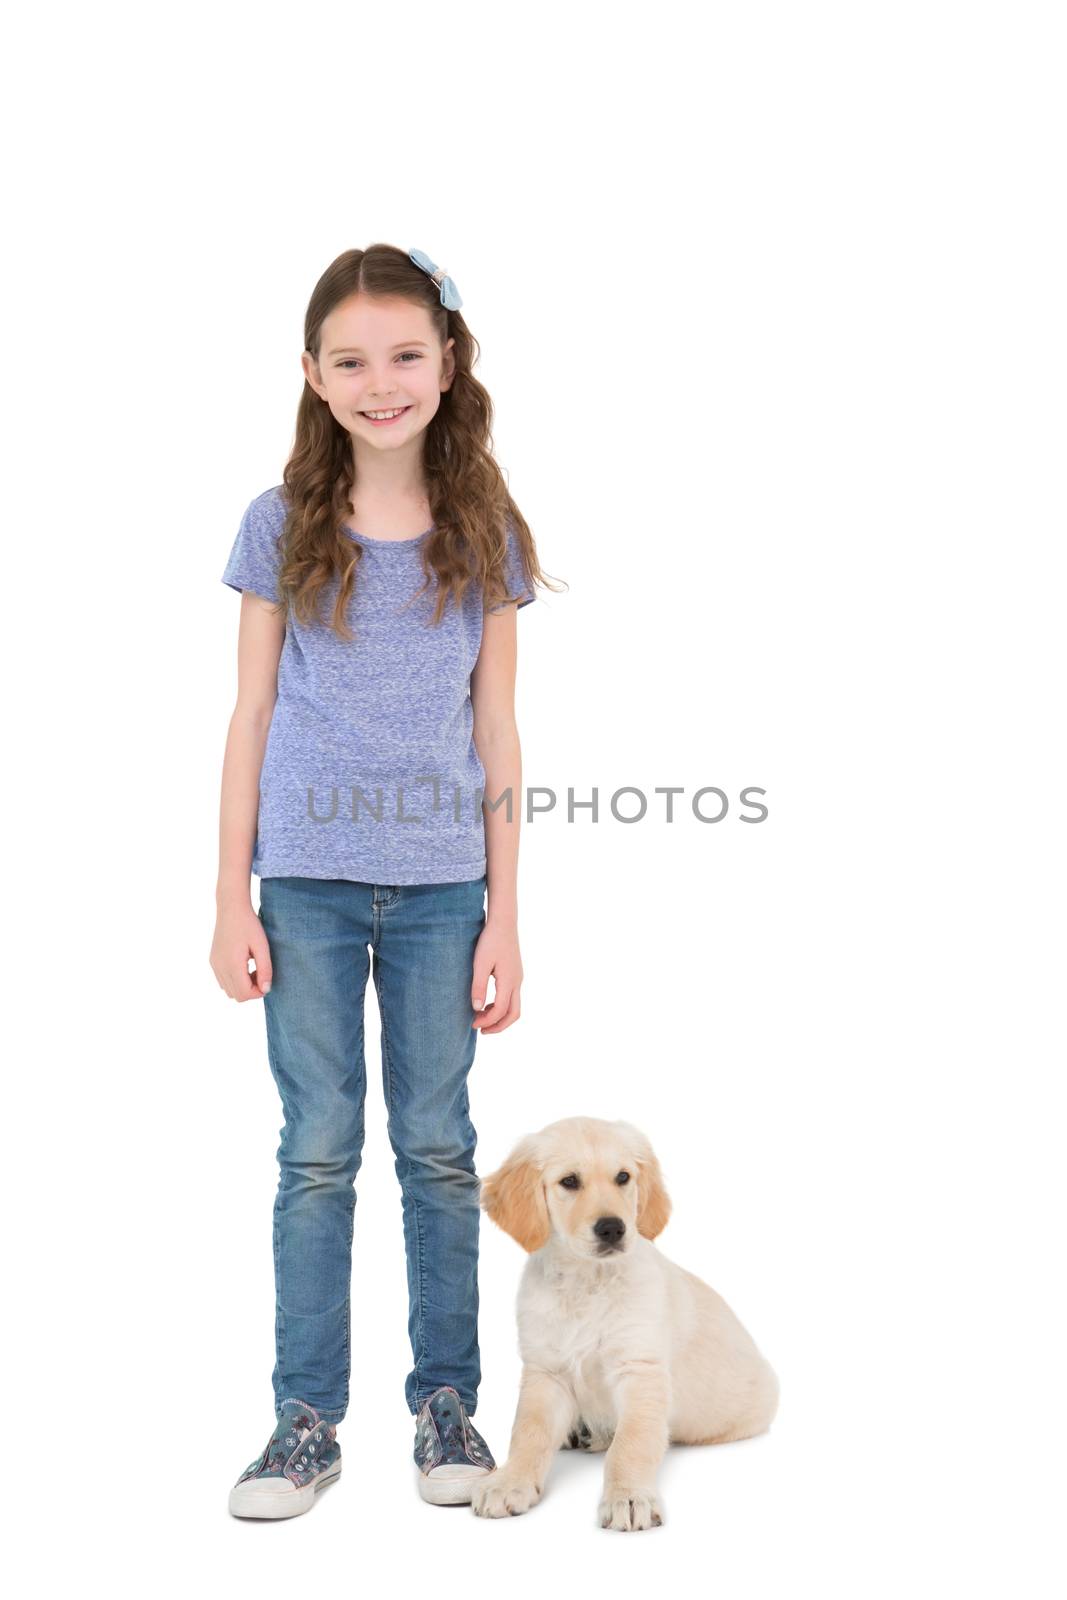 Smiling little girl standing next to dog  by Wavebreakmedia